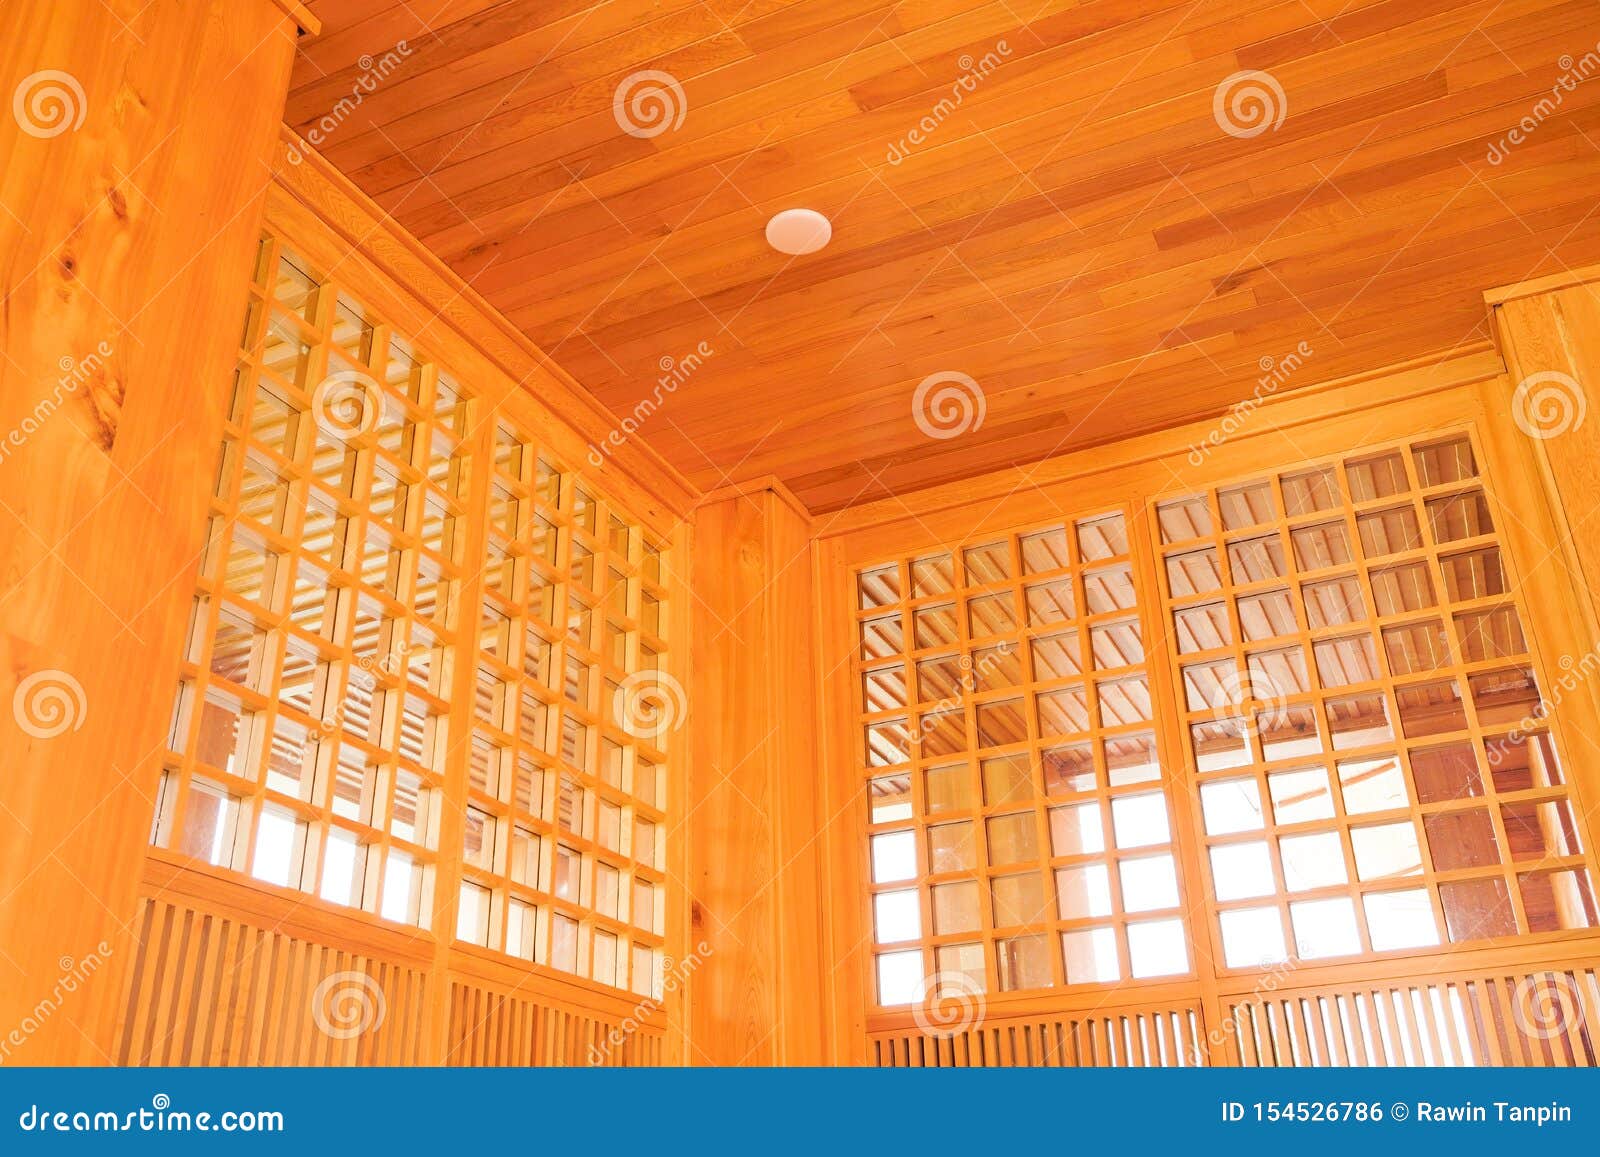 Traditional Wood Of Japan Style Texture Of Japanese Wooden Ceiling